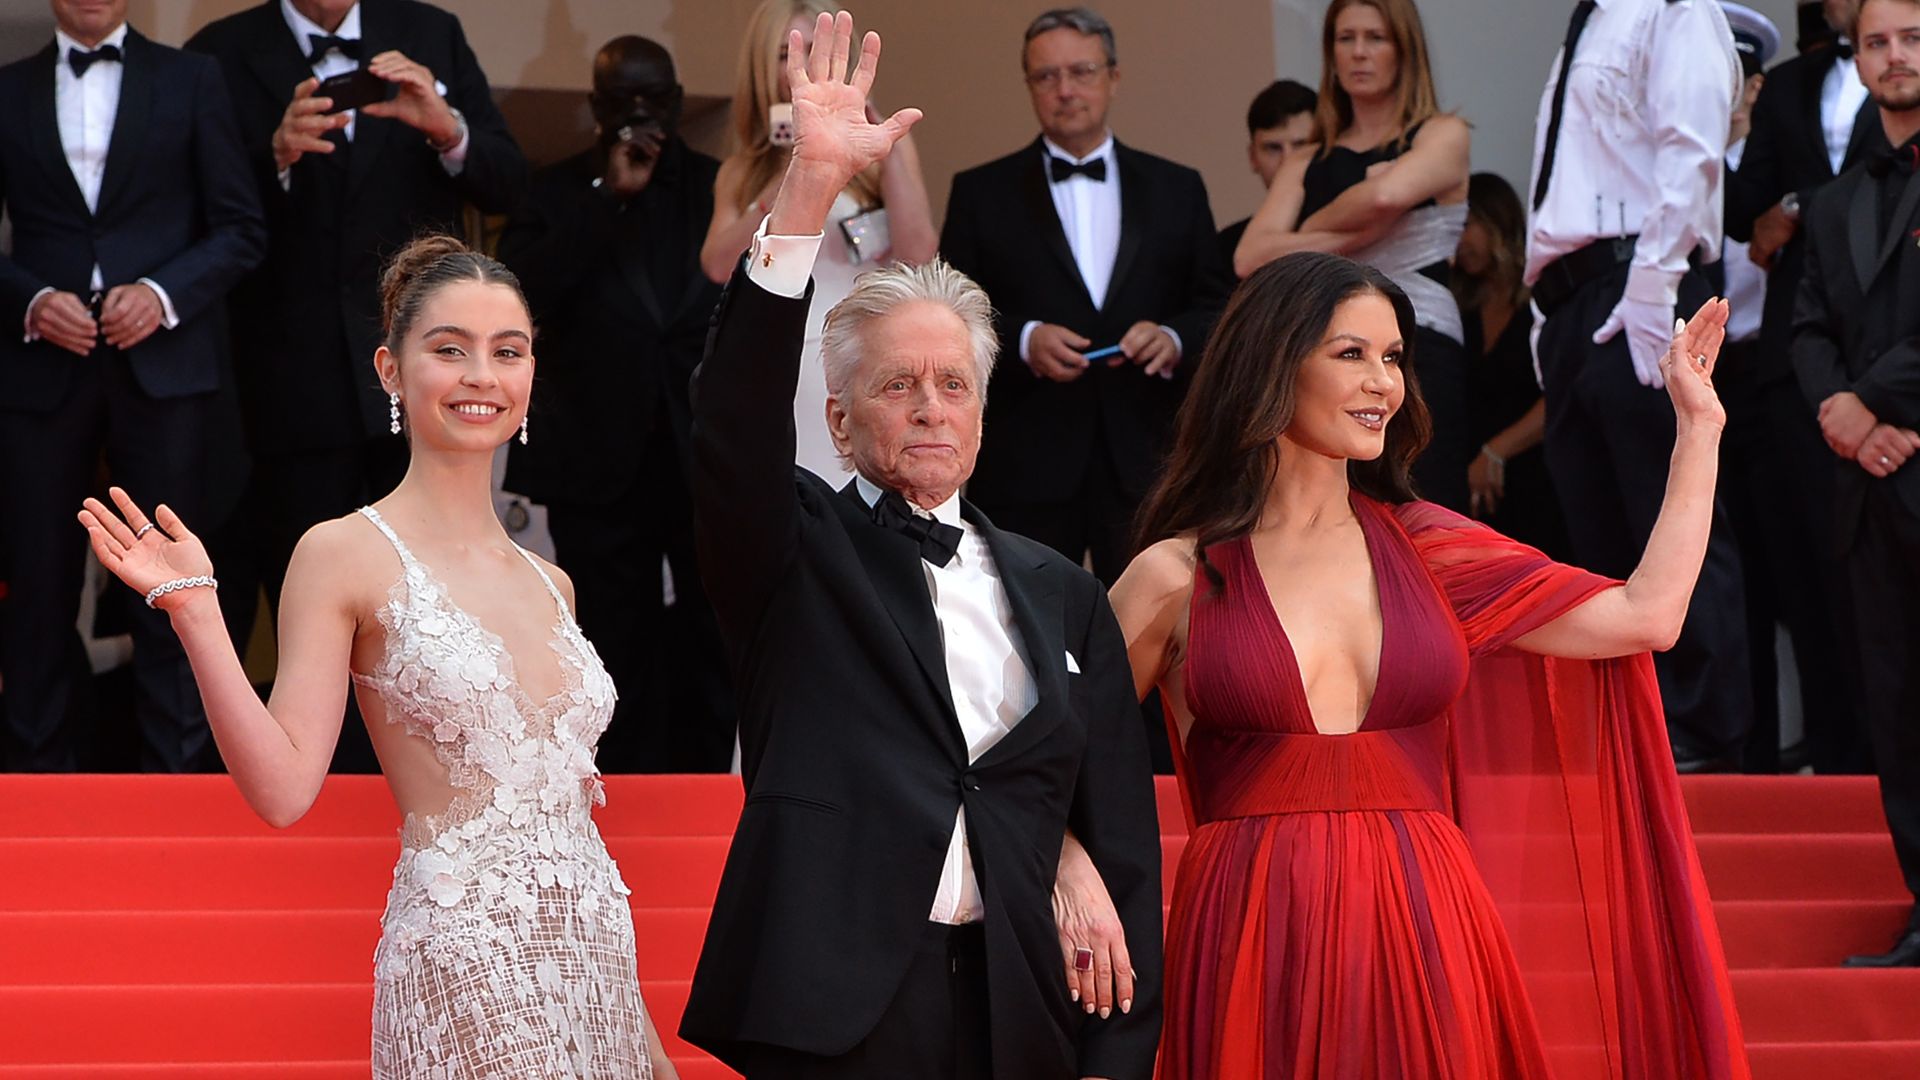 Michael Douglas and Catherine Zeta-Jones with daughter Carys on the red carpet 